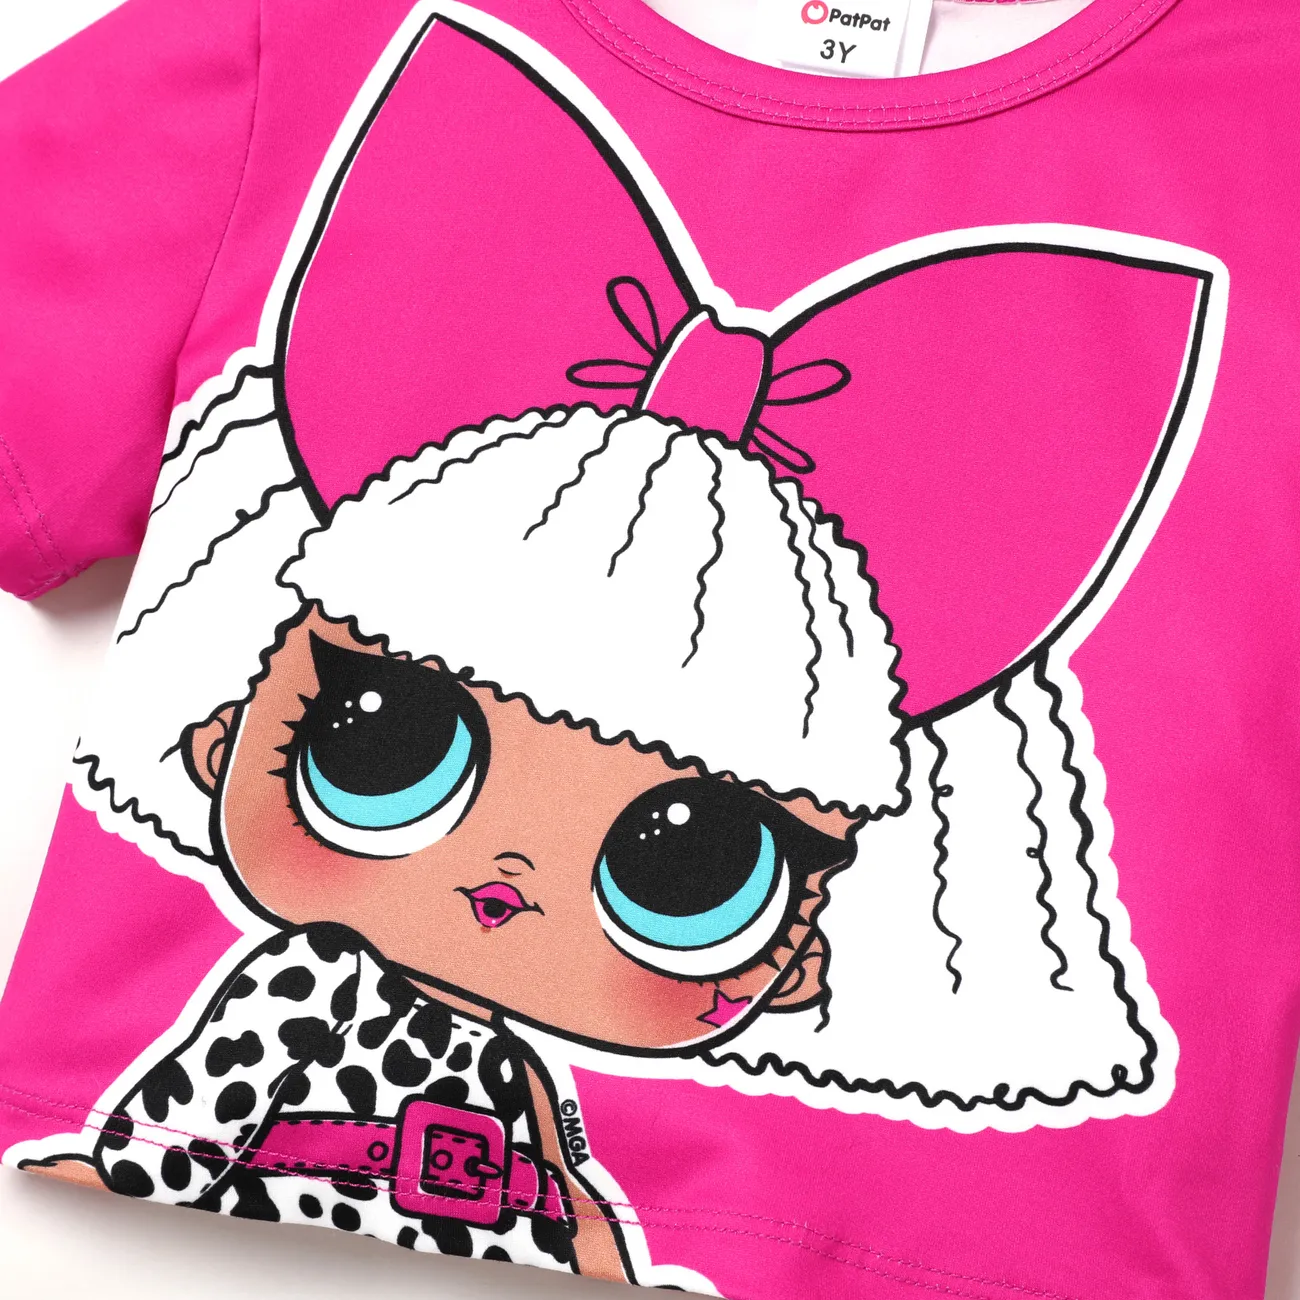 L.O.L. SURPRISE! Toddler Girl/Kid Girl Graphic Print Short-sleeve Tee and Skirt Roseo big image 1